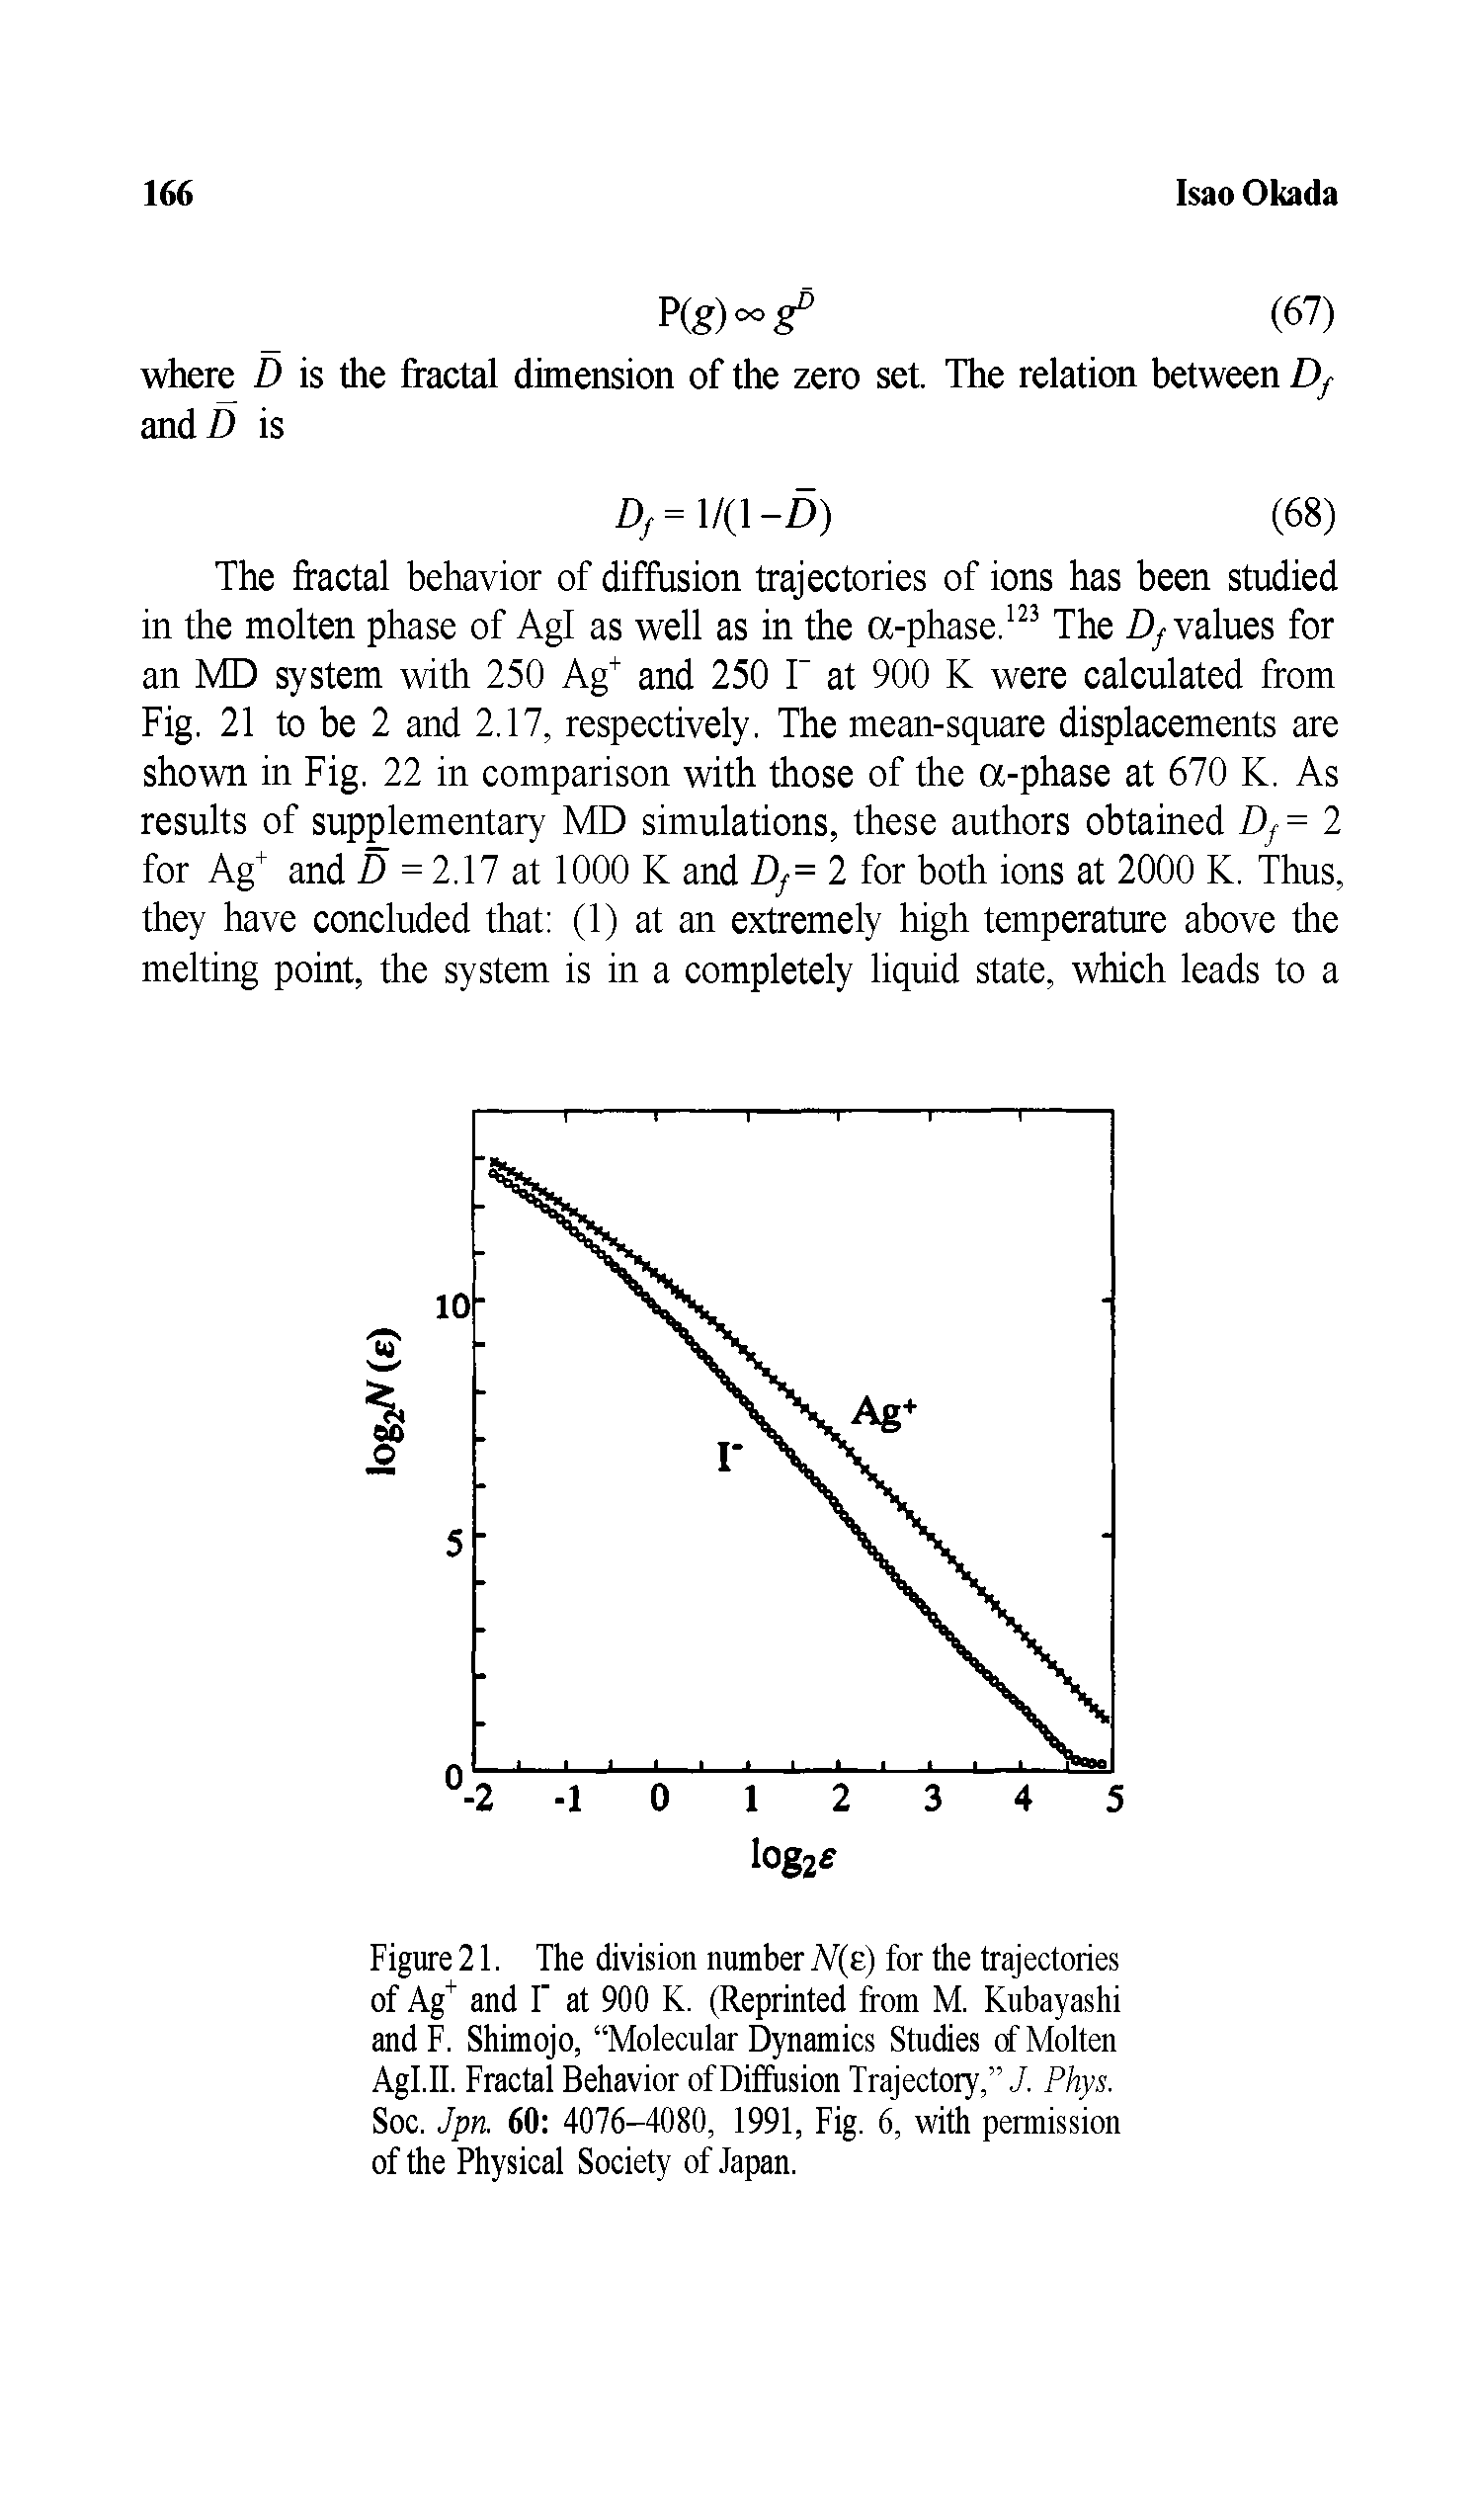 Figure21. The division number A(e) for the trajectories of Ag and I" at 900 K. (Reprinted from M. Kubayashi andF. Shimojo, Molecular Dynamics Studies of Molten Agl.II. Fractal Behavior of Diffusion Trajectory, J. Phys. Soc. Jpn. 60 4076-4080, 1991, Fig. 6, with permission of the Physical Society of Japan.